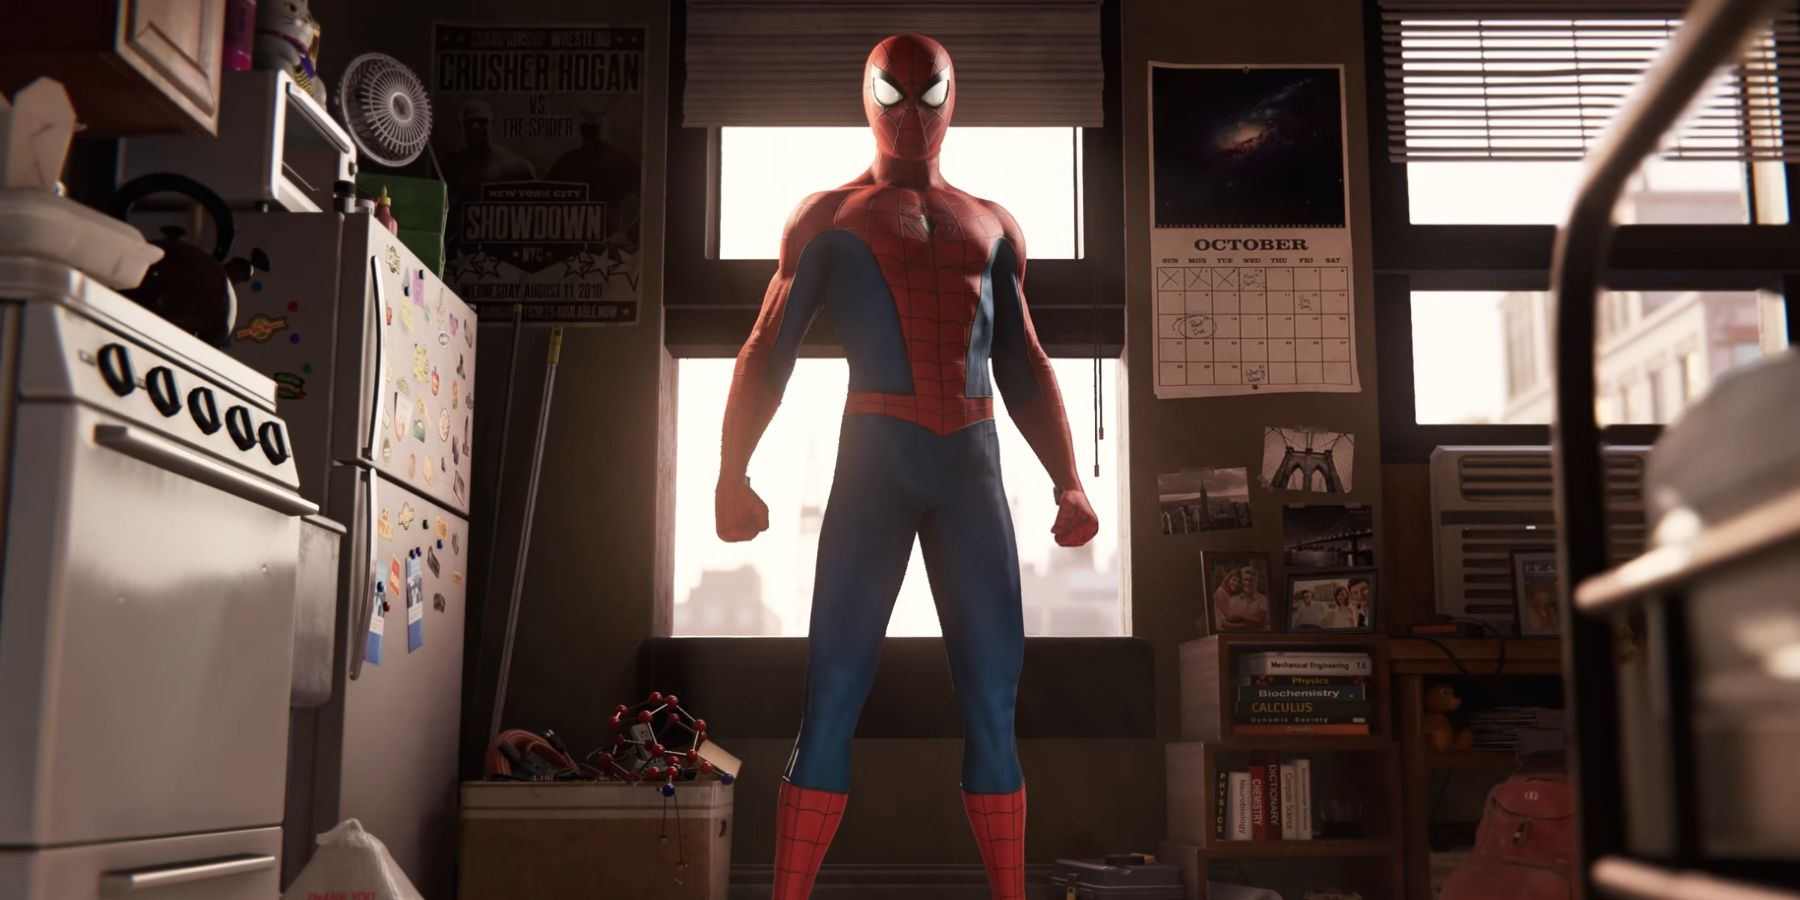 Marvel's Spider-Man Remastered Gets No Way Home Suits on PS5